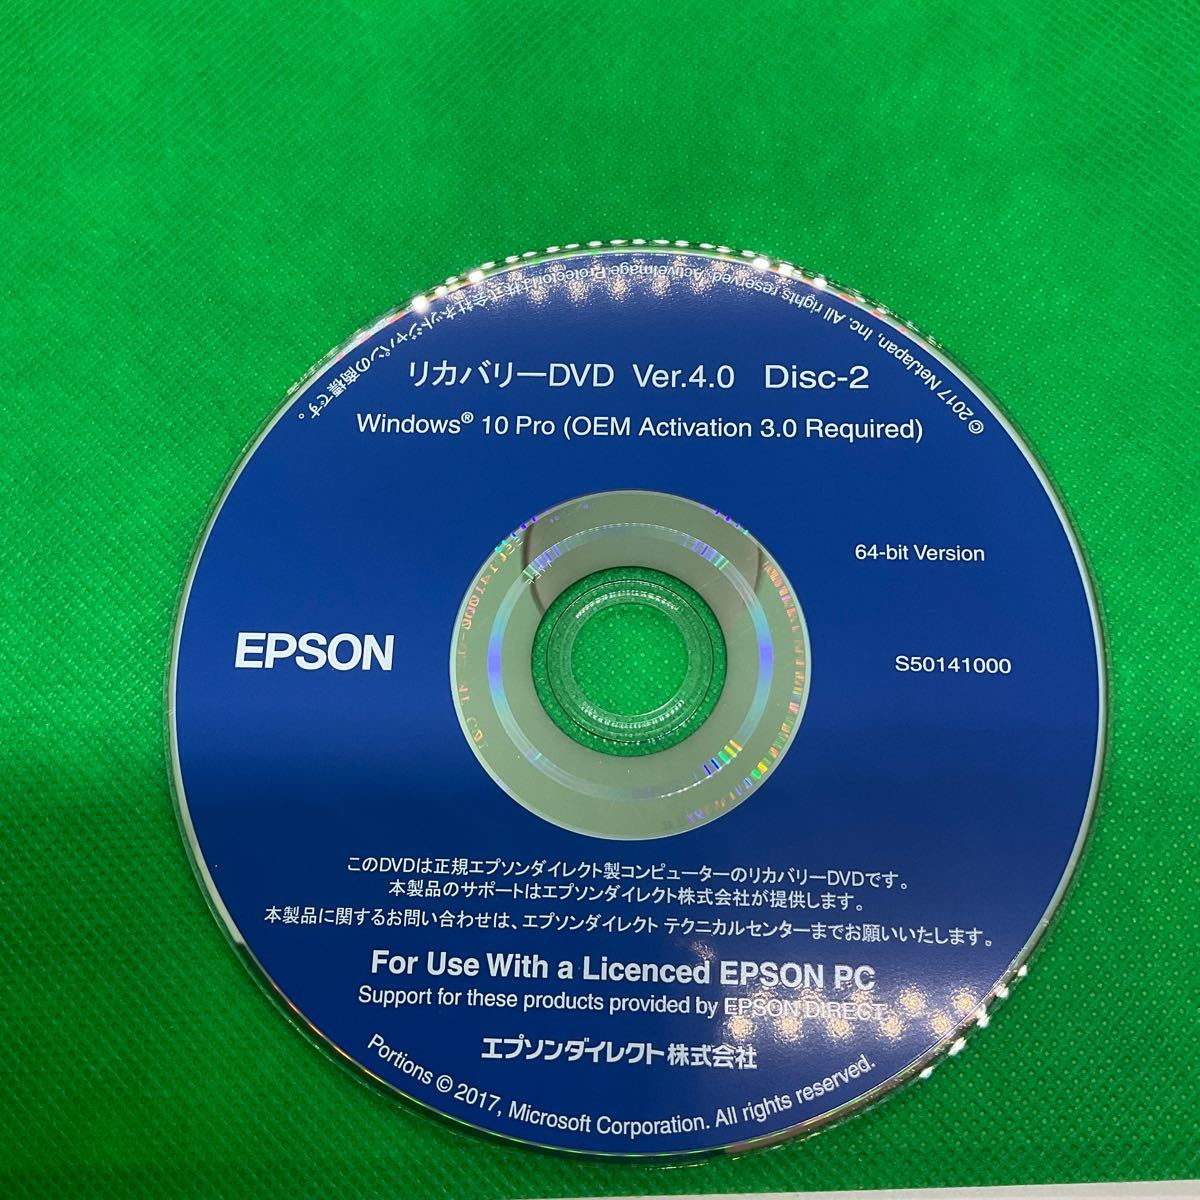 *E049) secondhand goods /EPSON recovery one DVD Ver.4.0 Windows 10 Pro (OEM Activation3.0 Required) 64-bit Version 2 pieces set 